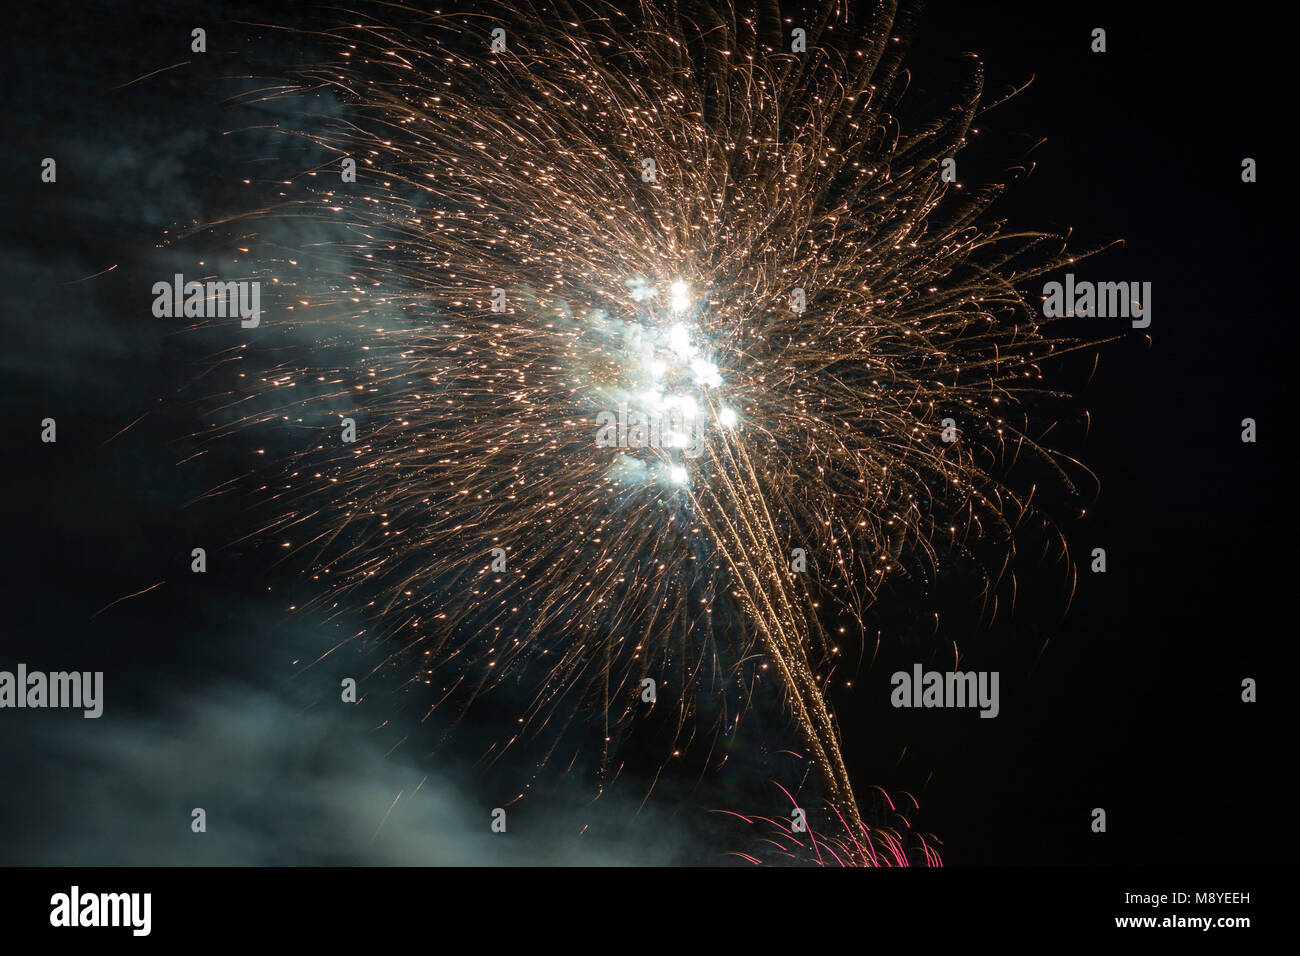 Colorful Fireworks Display Stock Photo